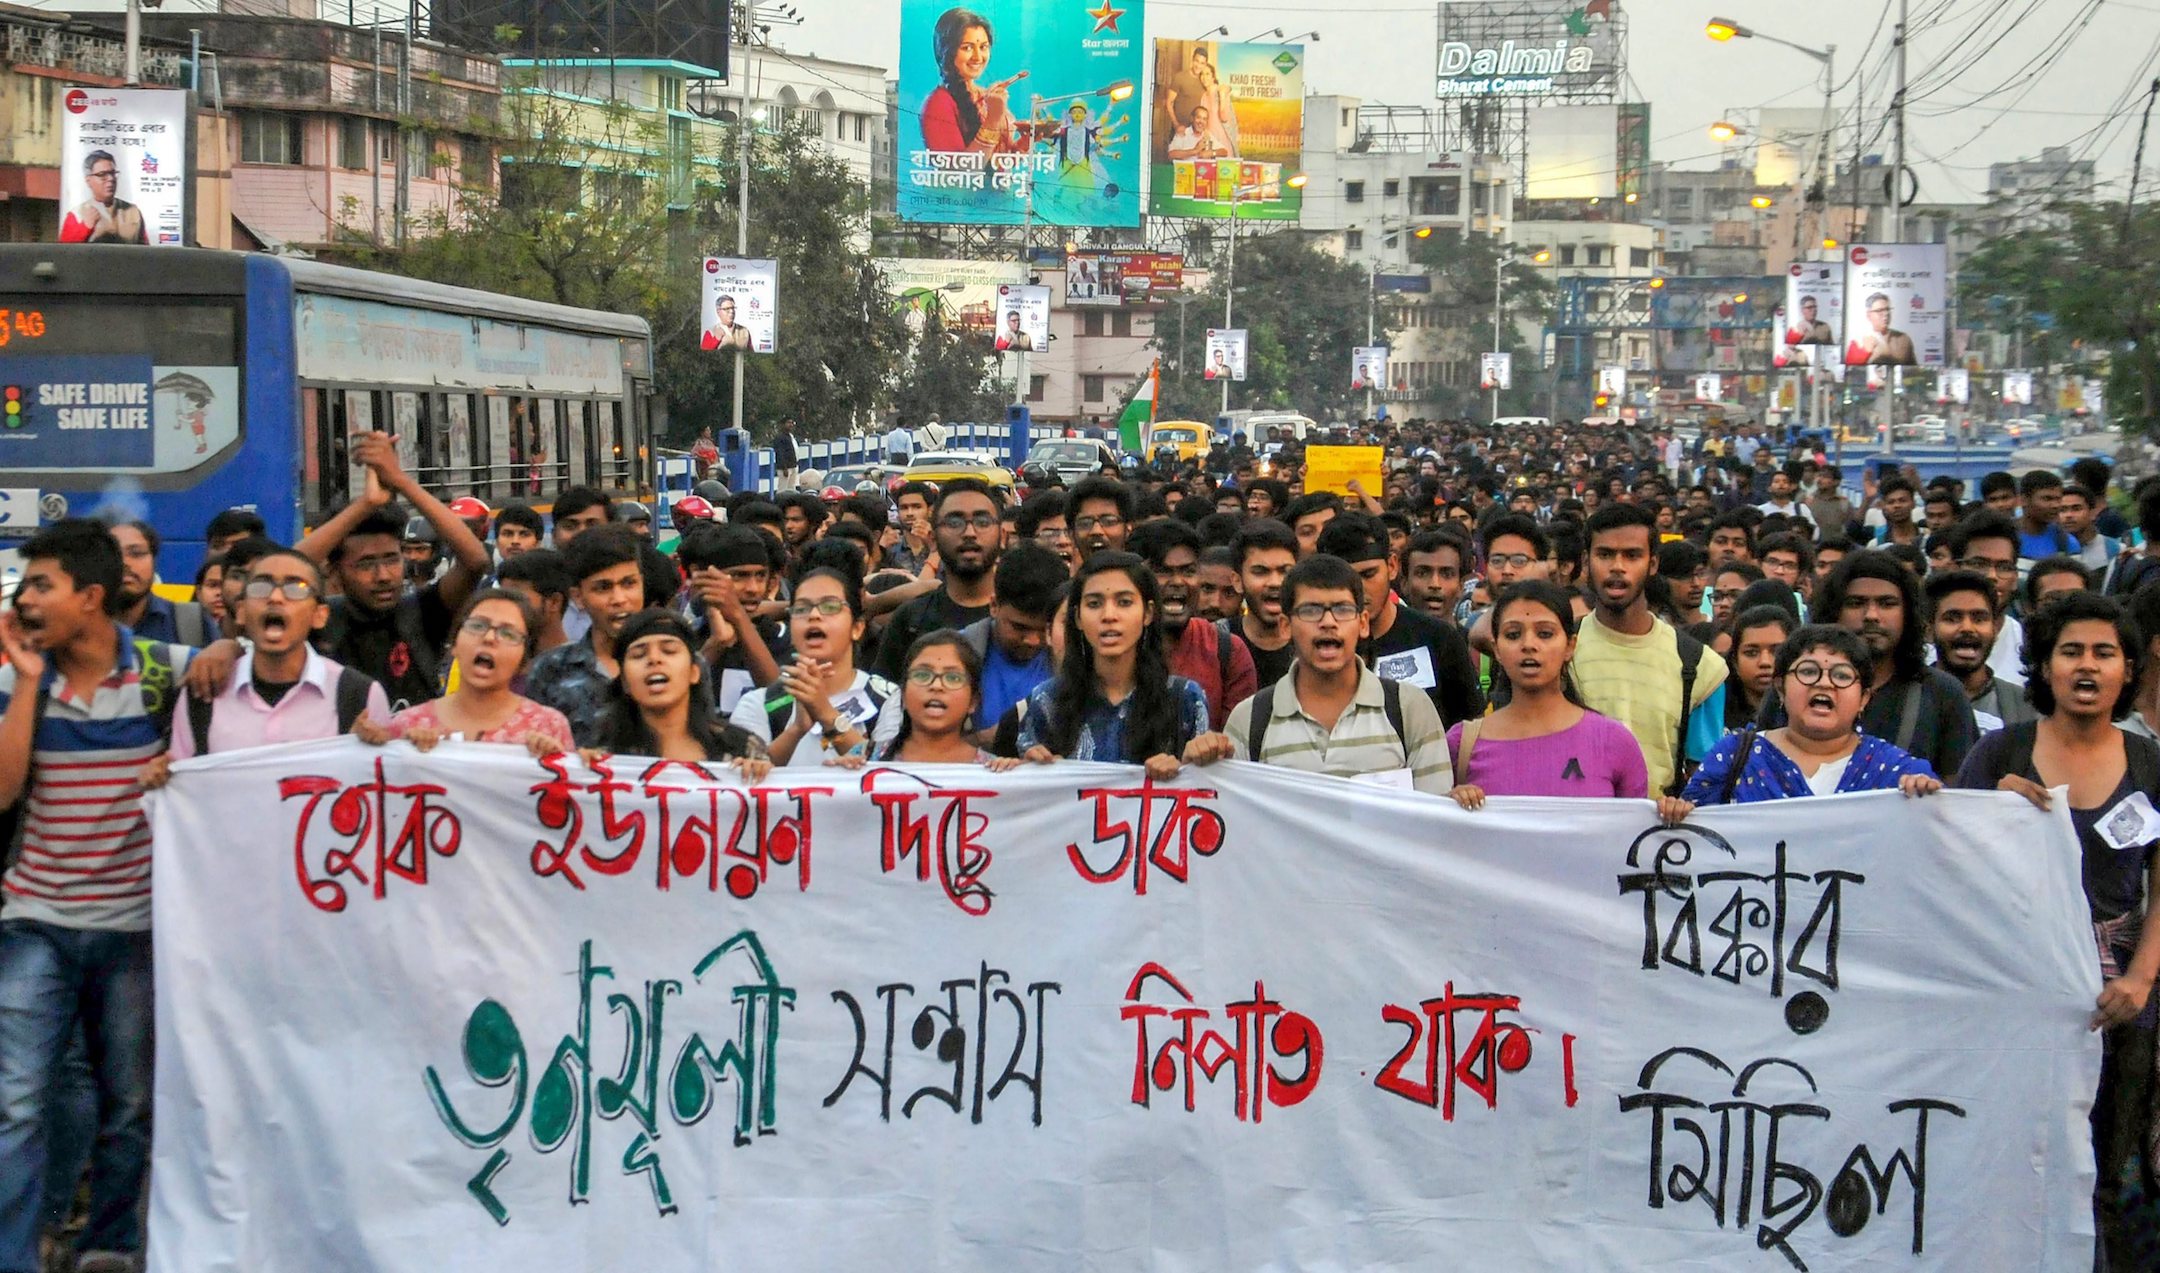 Students of Jadavpur University participate demand that the student elections be conducted immediately, among other things, in Calcutta on Wednesday, February 20. The vice-chancellor is reportedly physically and mentally broken after students allegedly assaulted him